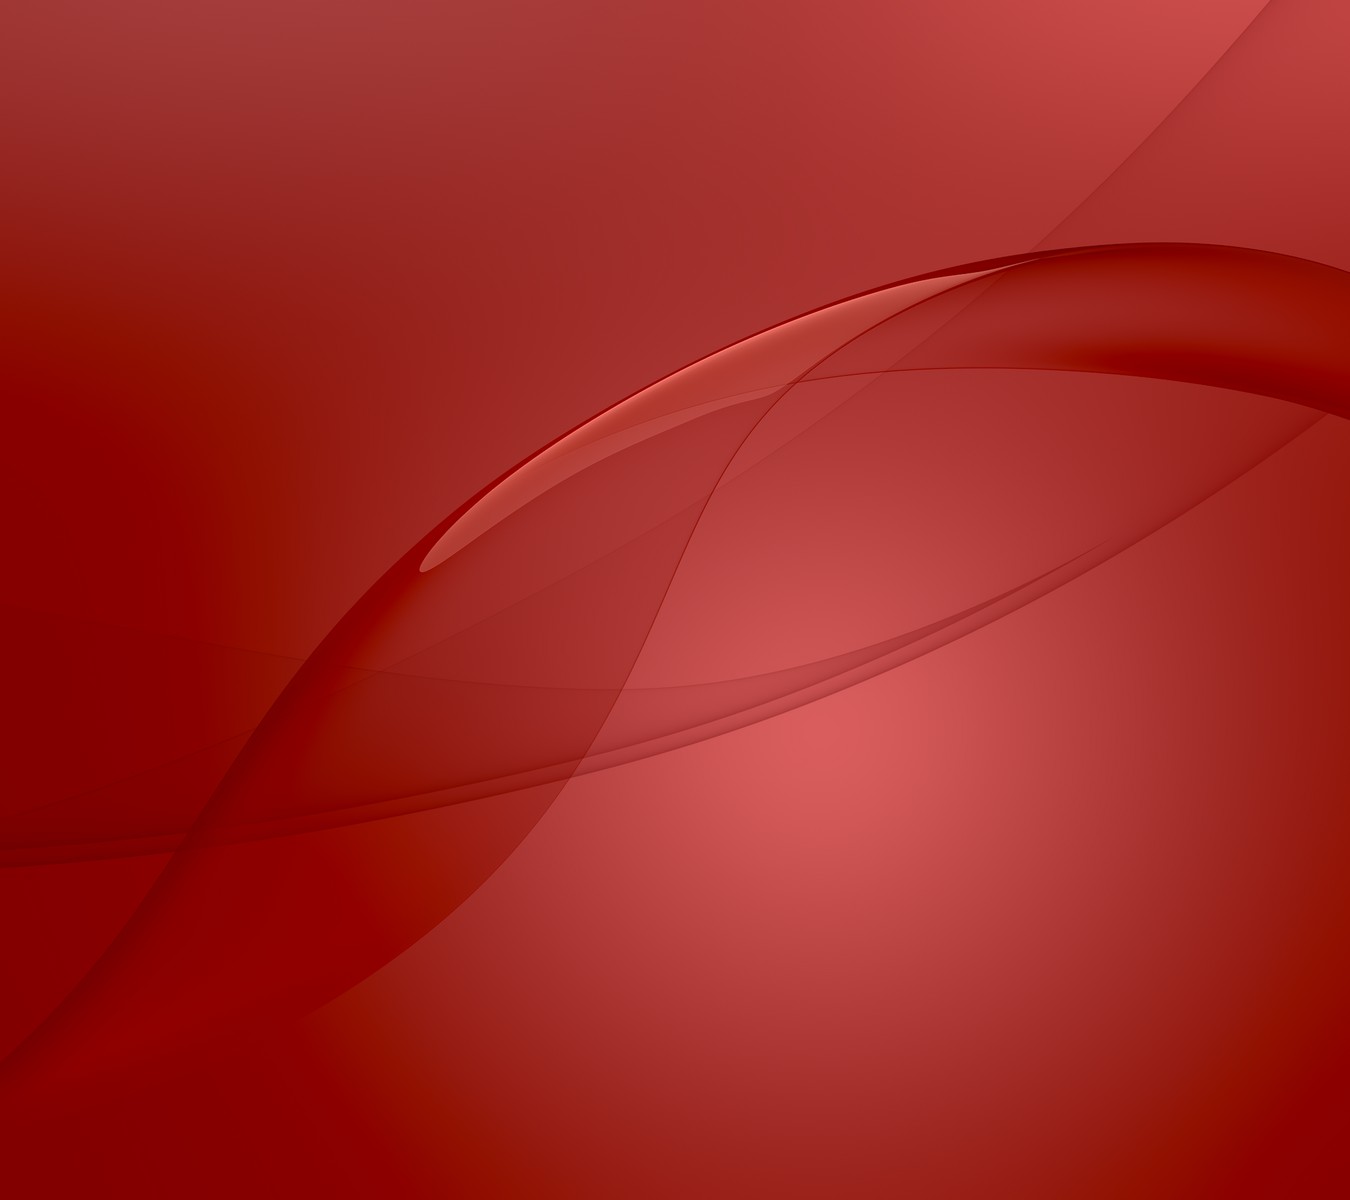 All Official Sony Xperia Z3 Wallpaper Here